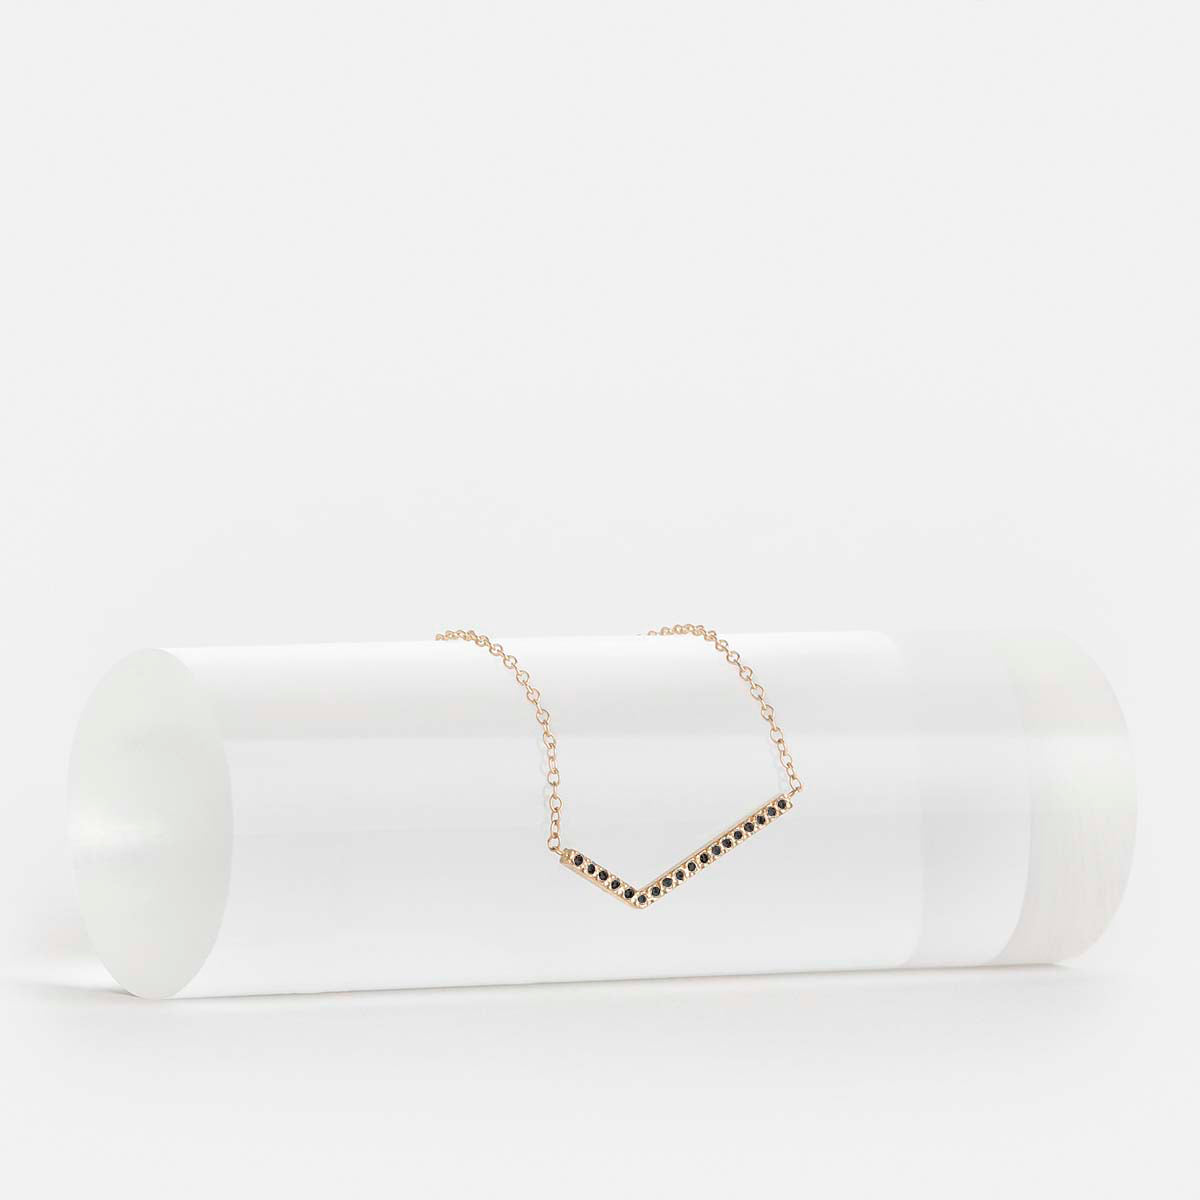 Veva Unique Necklace in 14k Gold set with Black Diamonds By SHW Fine Jewelry NYC